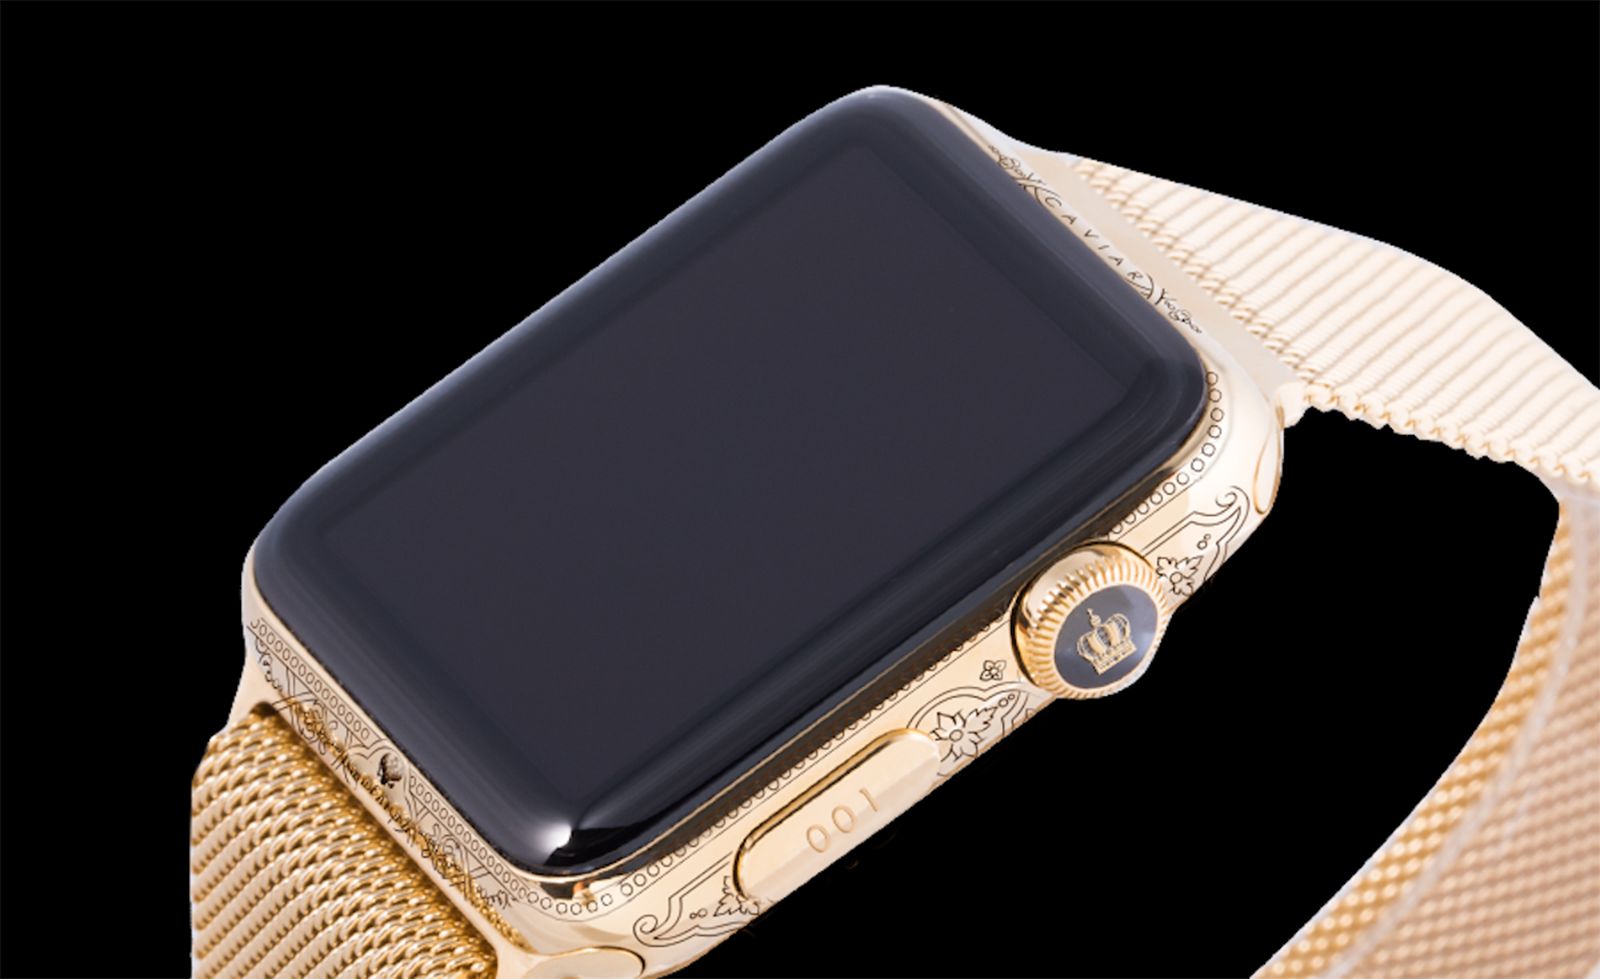 apple watch epoca takes decadent to a new level russian leader level to be exact image 1